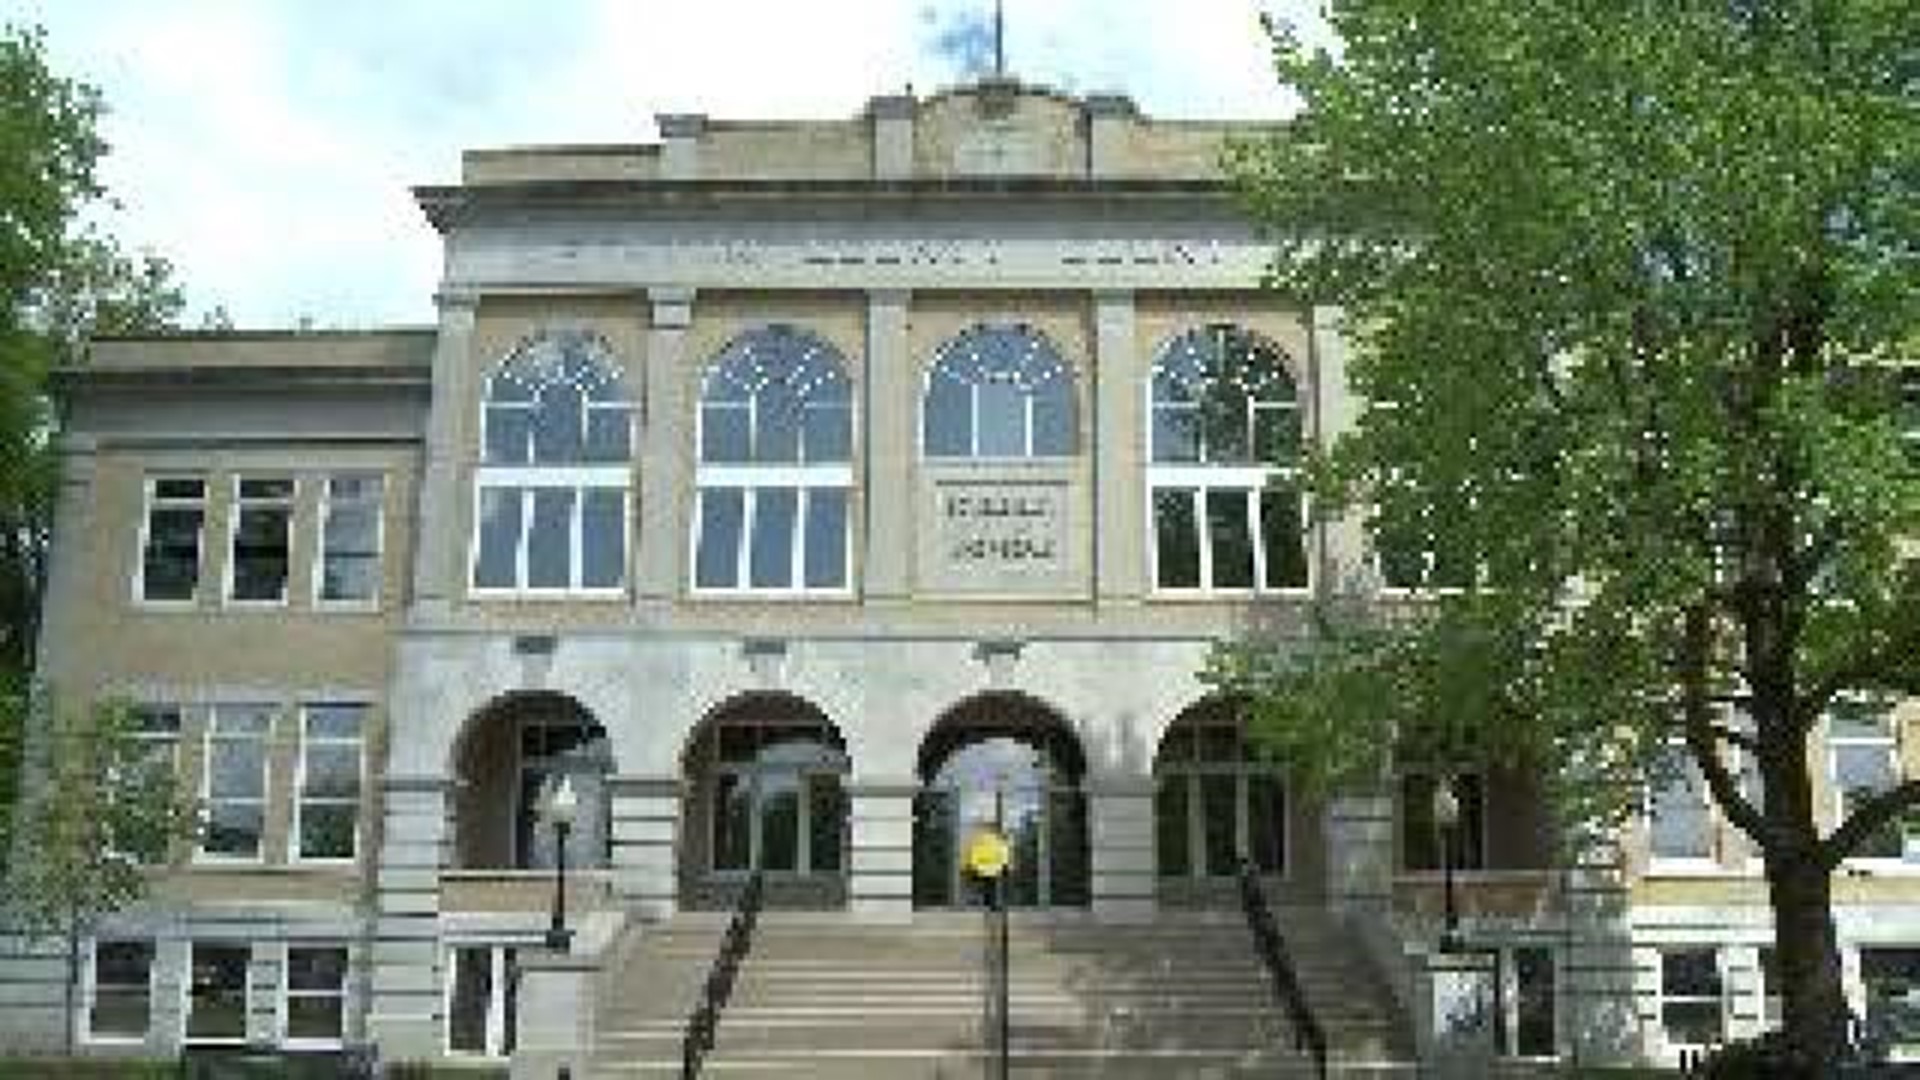 Benton County to Consider New Courthouse Location